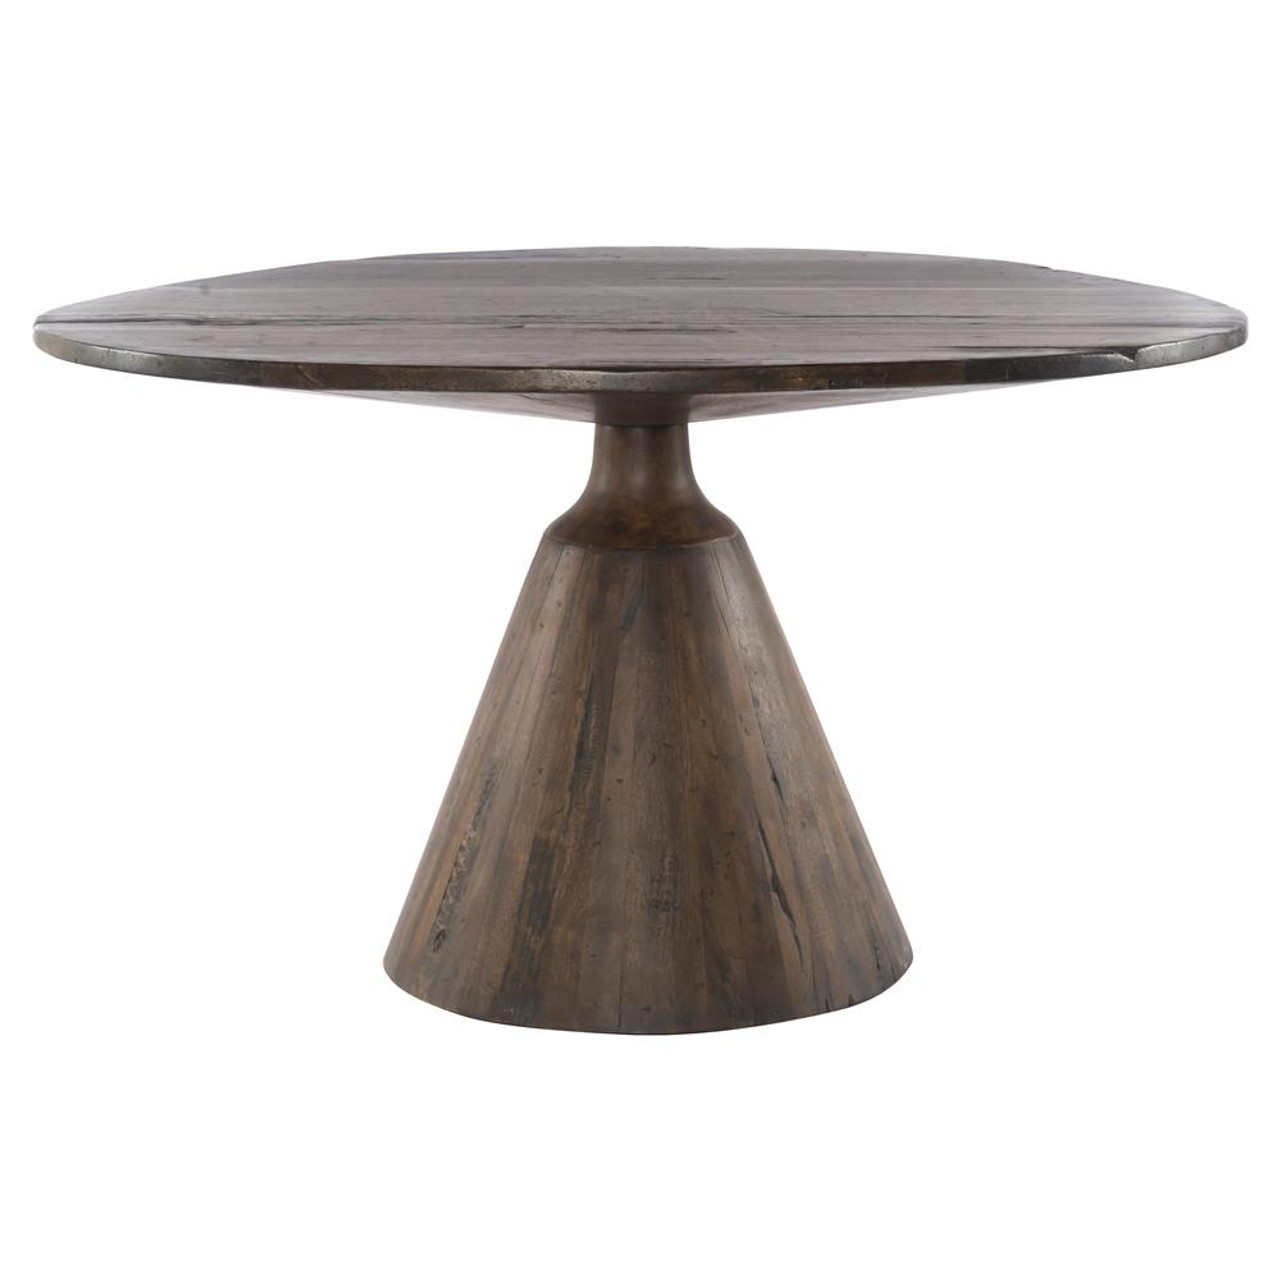 Bronx Old Wood Round Pedestal Dining Table 54 Zin Home